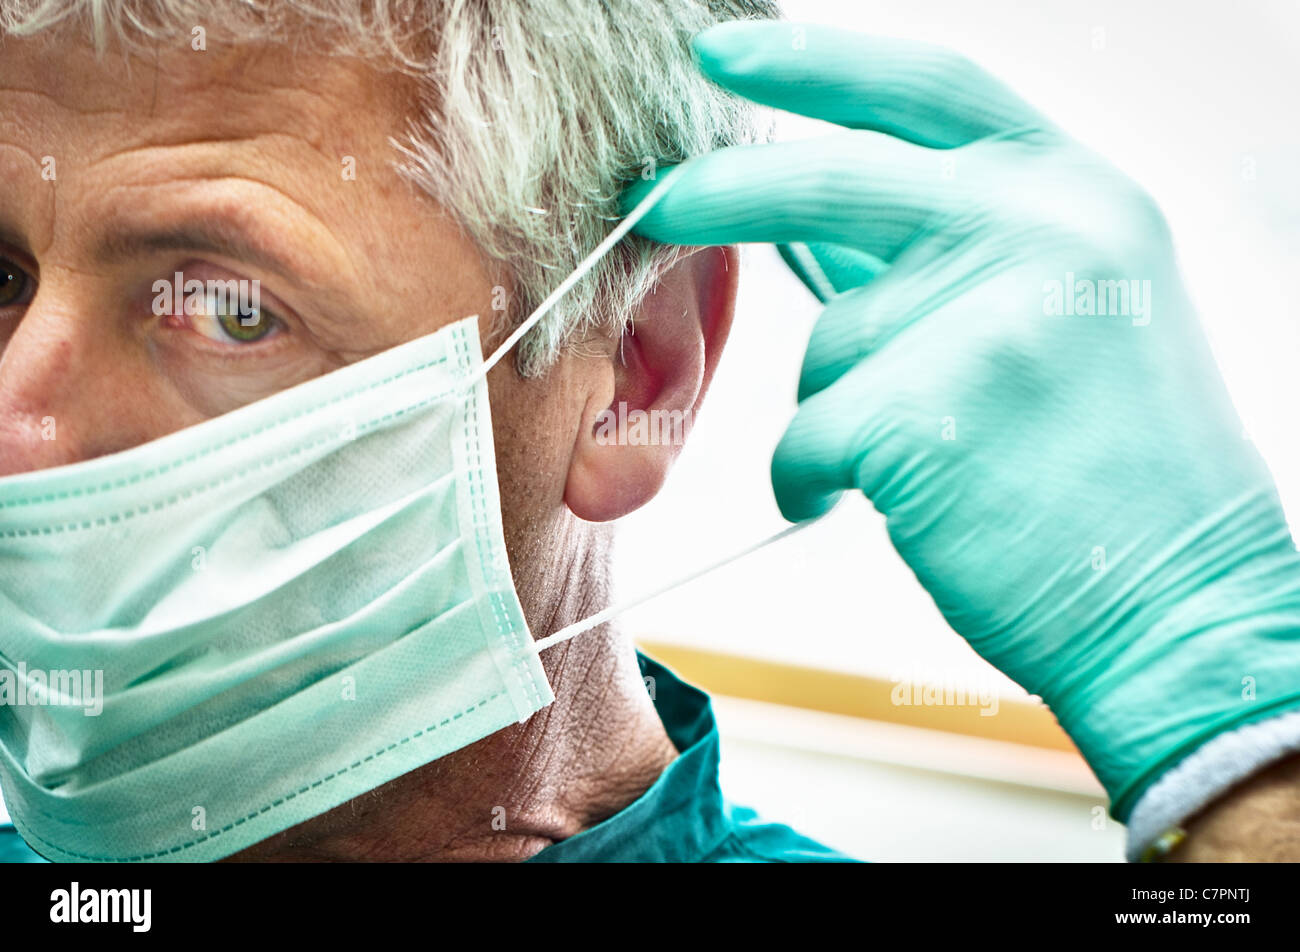 Dentist putting on face mask Stock Photo